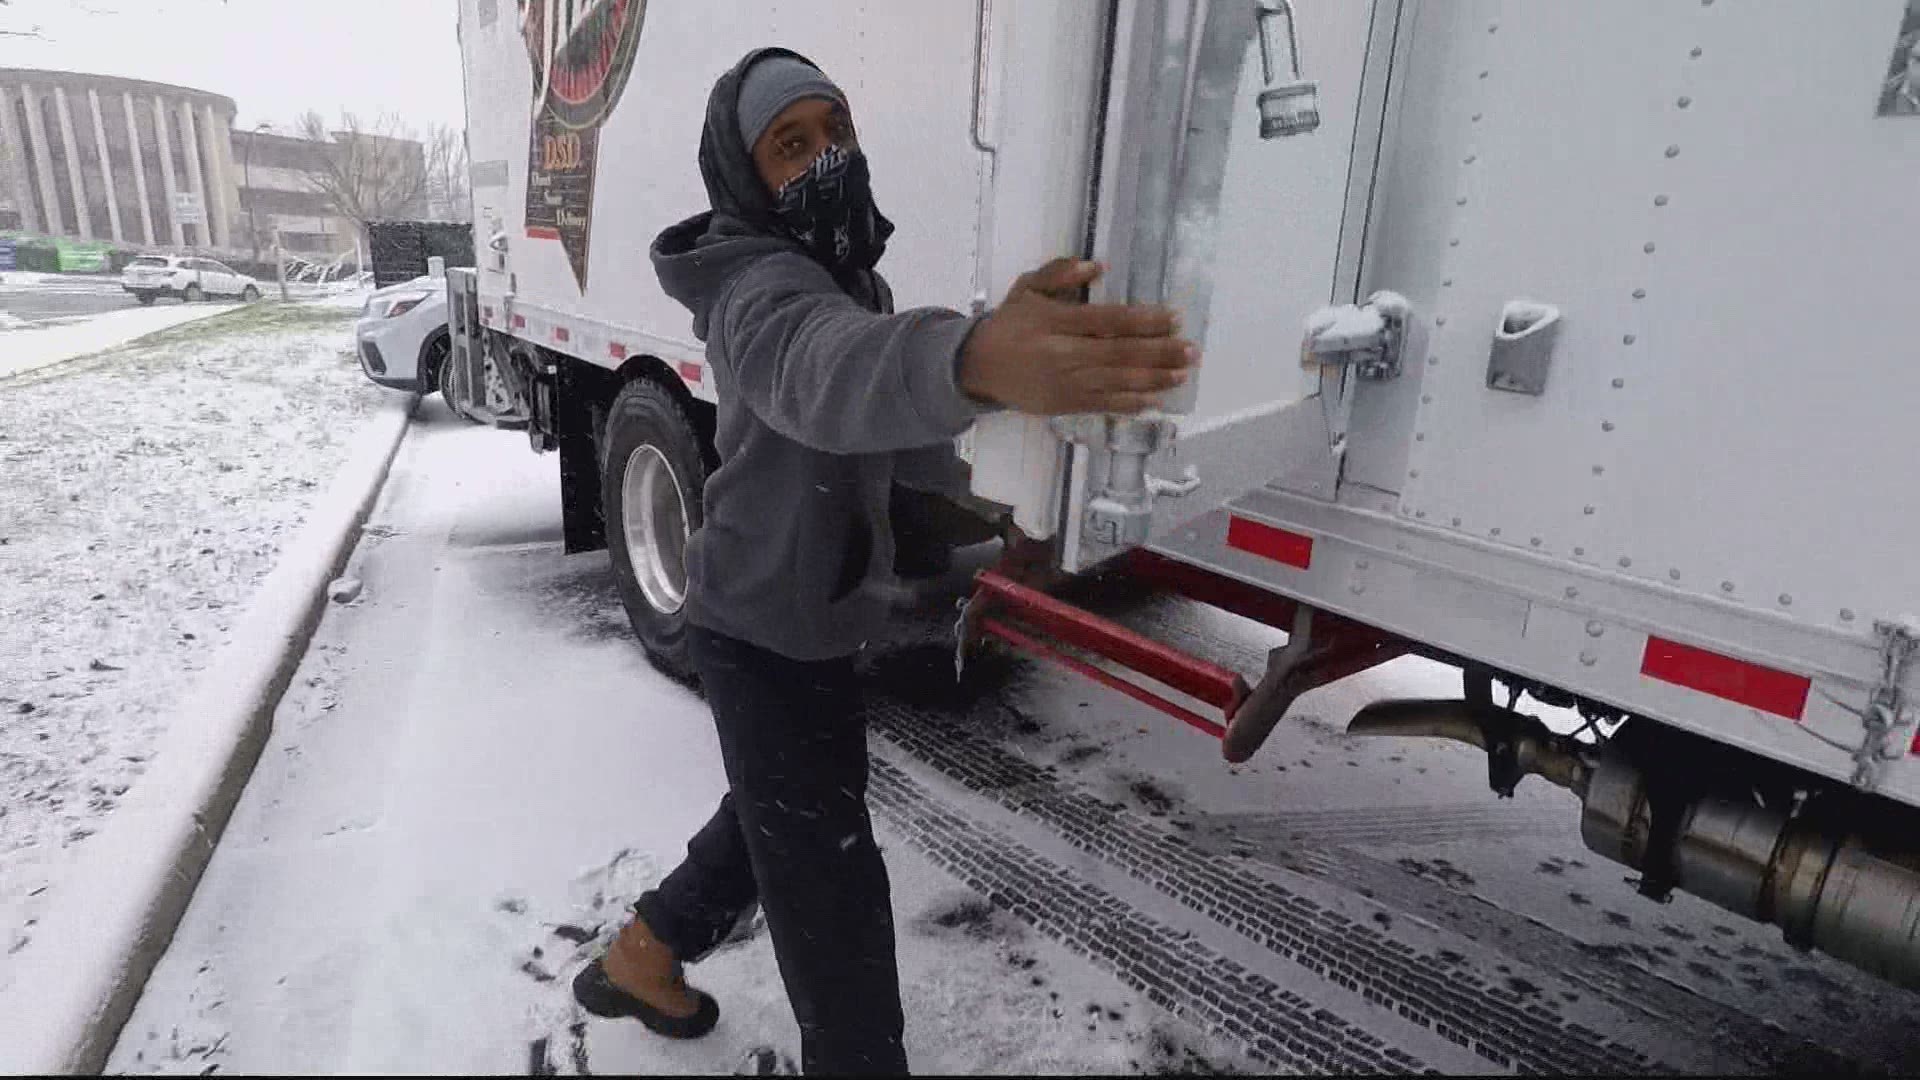 A truck driver delivering snow shares how he is managing on the snowy and icy roads in the DMV.